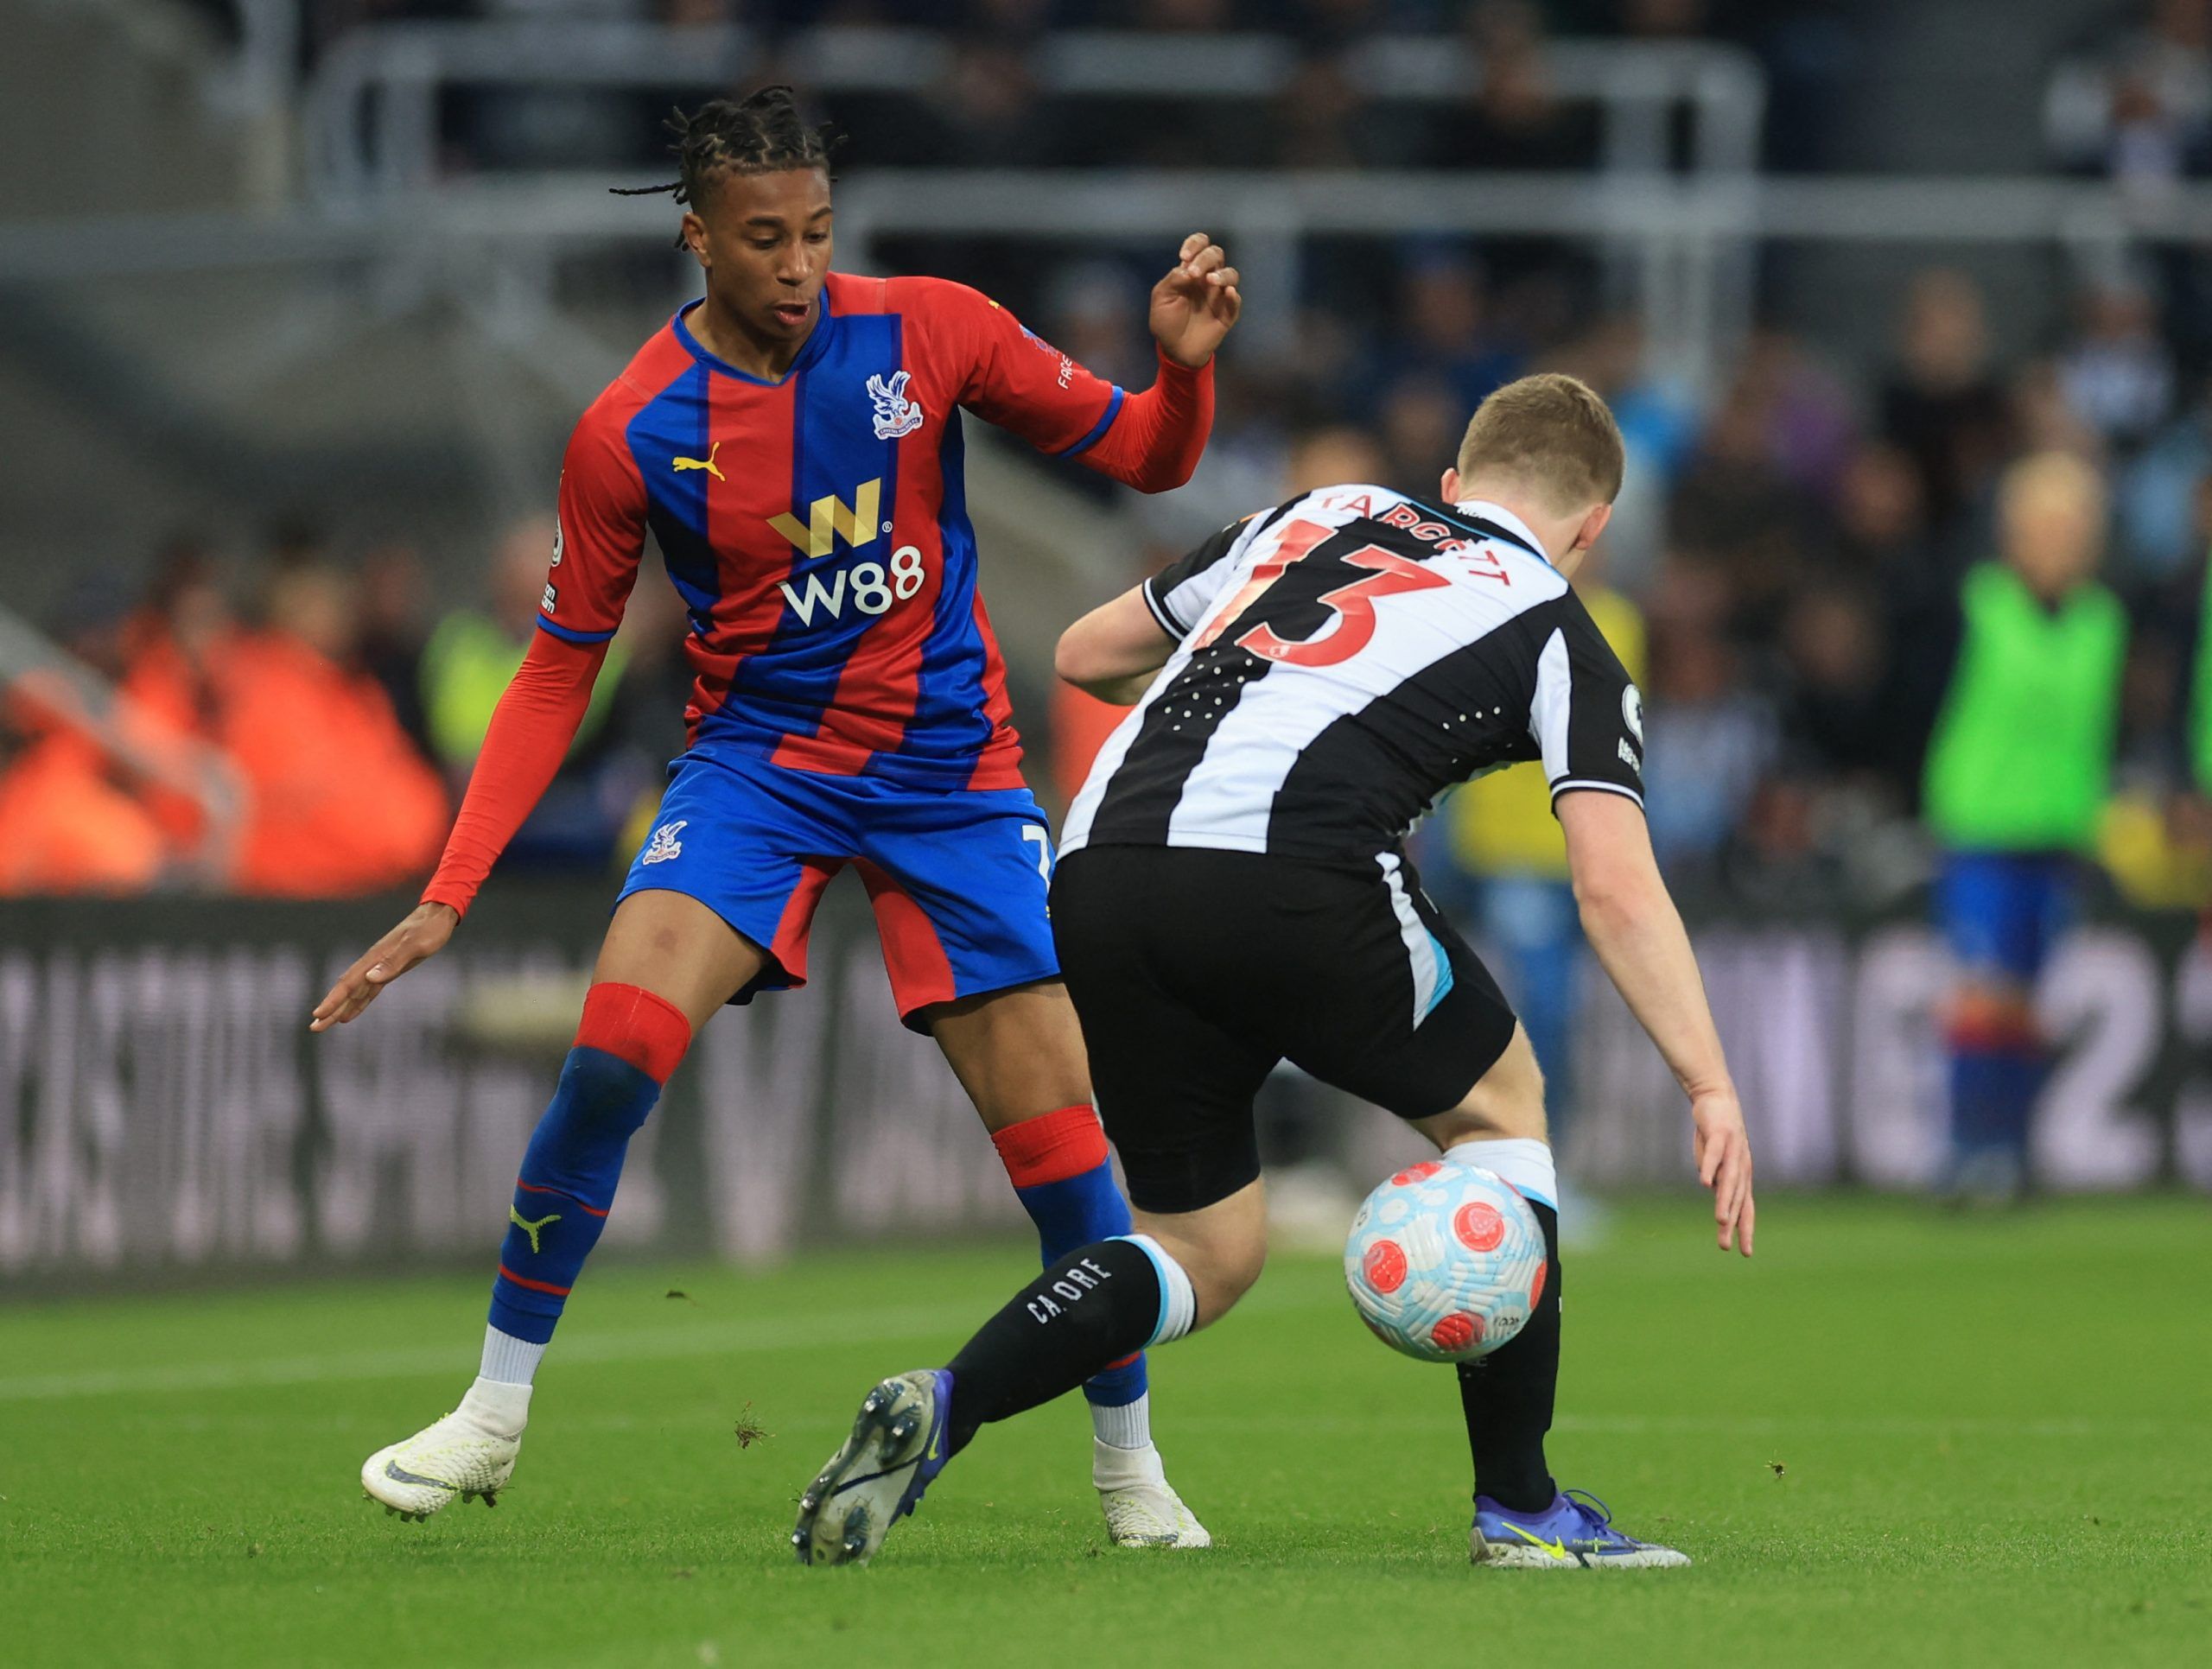 Crystal Palace's Michael Olise in action with Newcastle United's Matt TargettSoccer Football - Premier League - Newcastle United v Crystal Palace - St James' Park, Newcastle, Britain - April 20, 2022 Crystal Palace's Michael Olise in action with Newcastle United's Matt Targett Action Images via Reuters/Lee Smith EDITORIAL USE ONLY. No use with unauthorized audio, video, data, fixture lists, club/league logos or 'live' services. Online in-match use limited to 75 images, no video emulation. No use